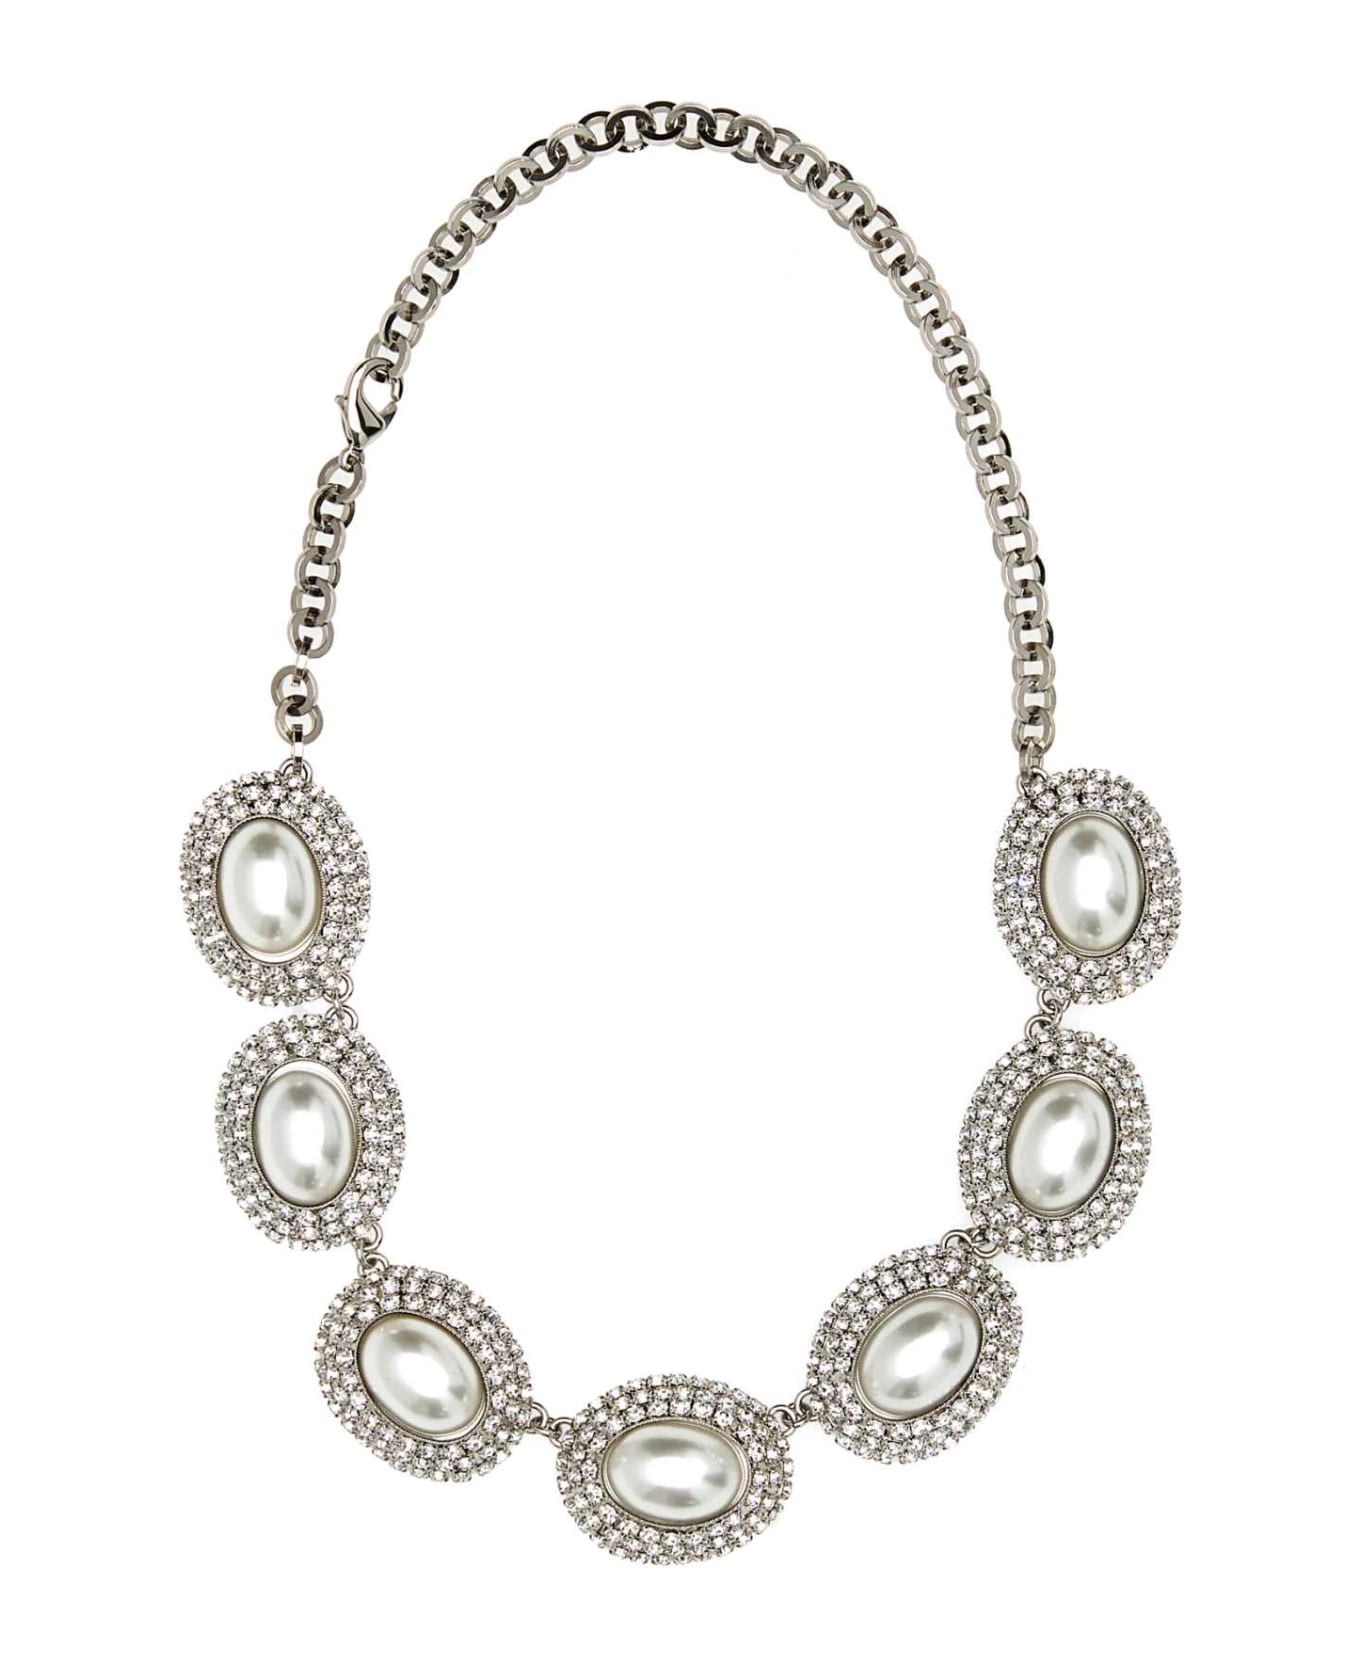 Alessandra Rich Embellished Metal Necklace - CRYSILVER ネックレス